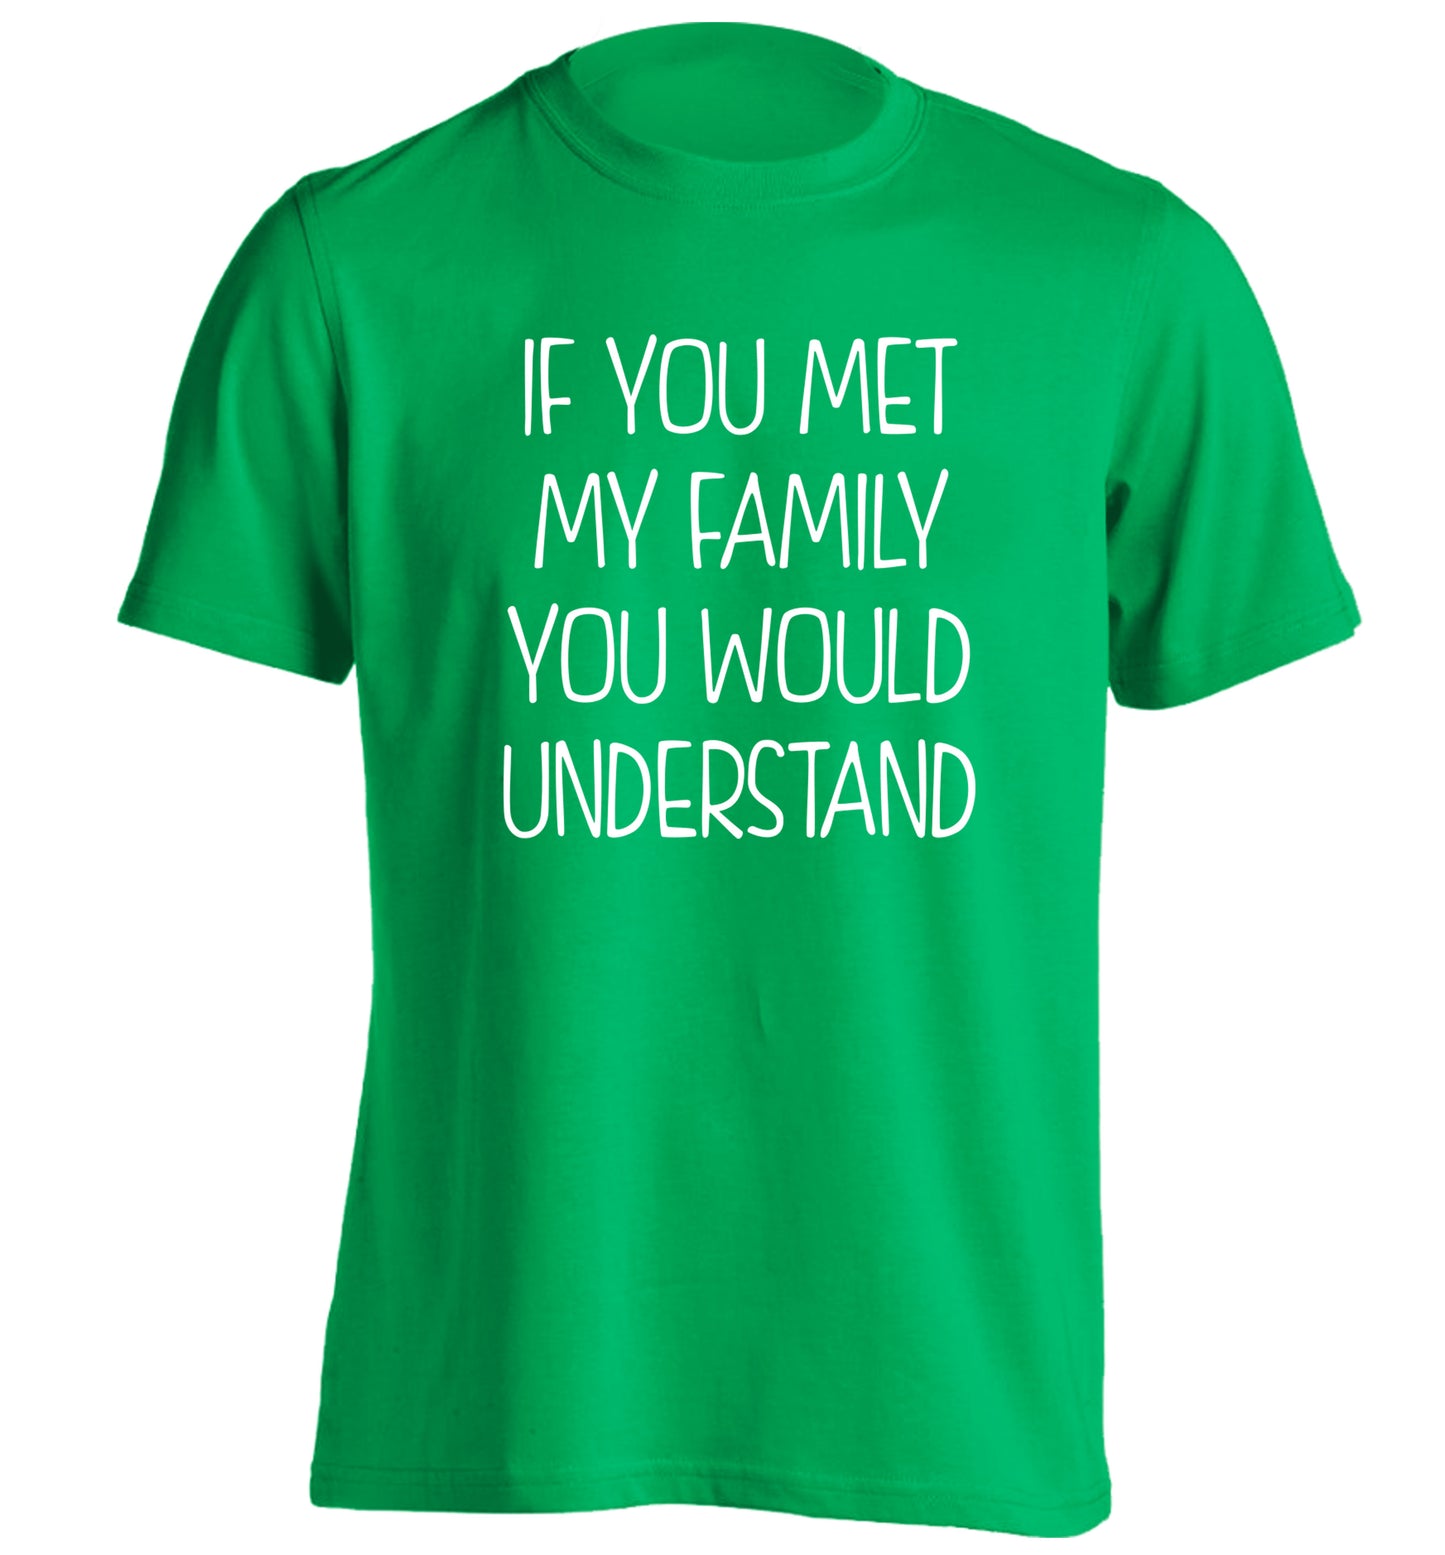 If you met my family you would understand adults unisex green Tshirt 2XL